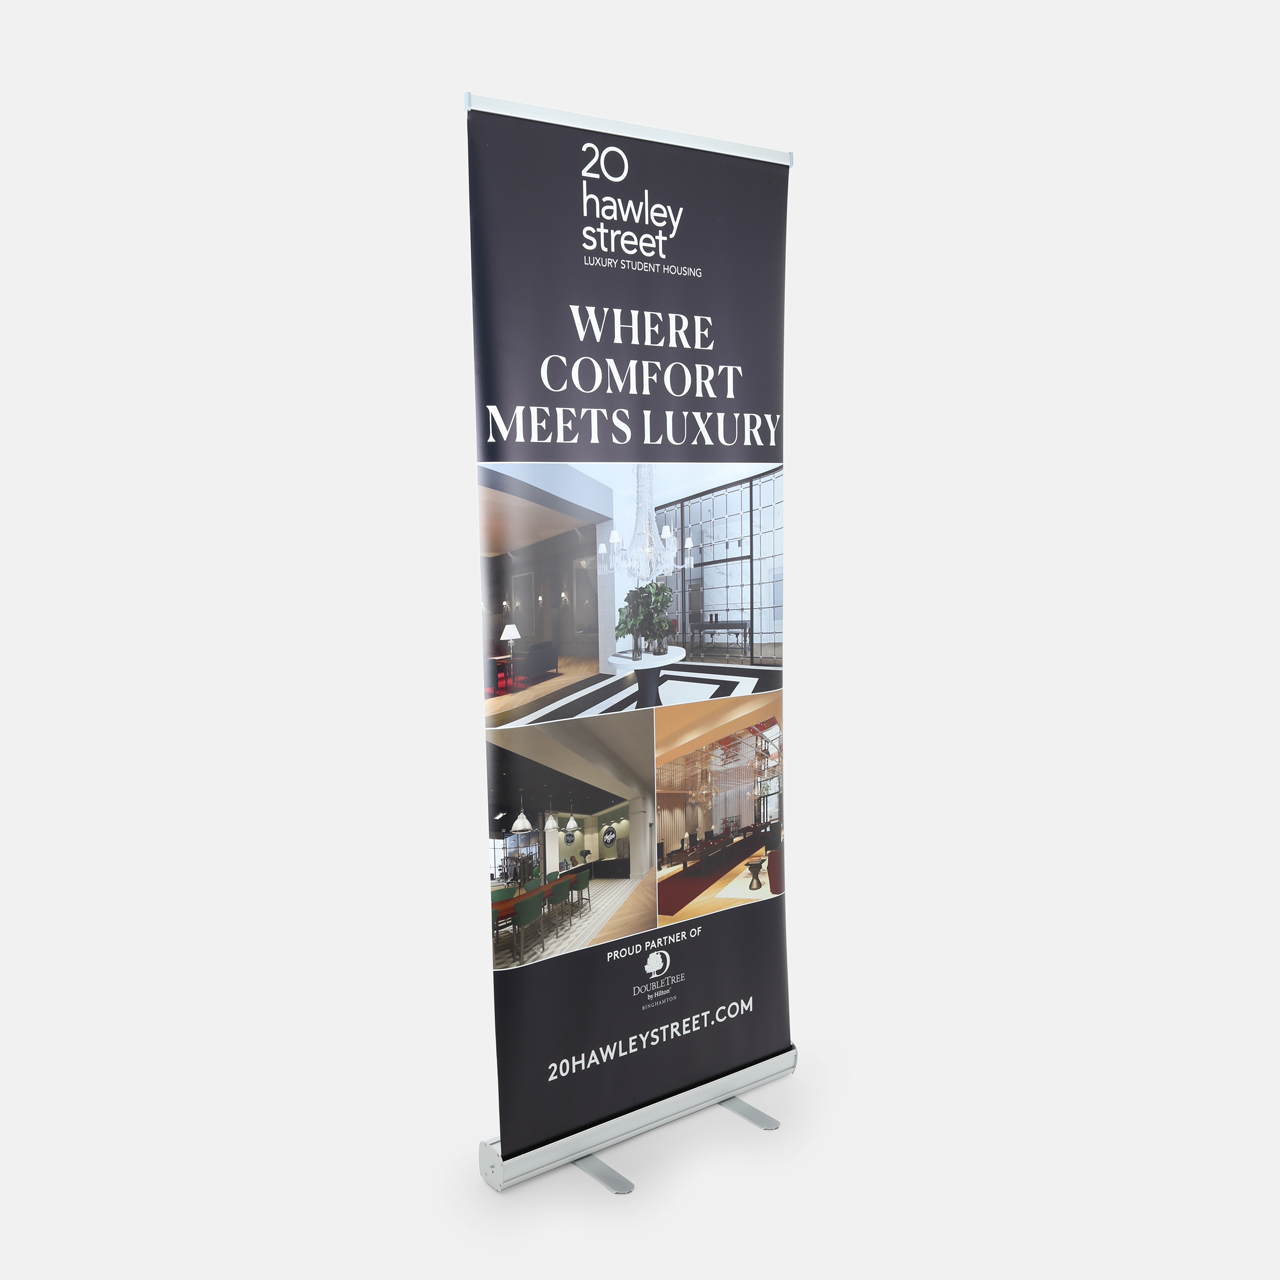 A custom retractable banner with a silver stand printed with real estate imagery and 